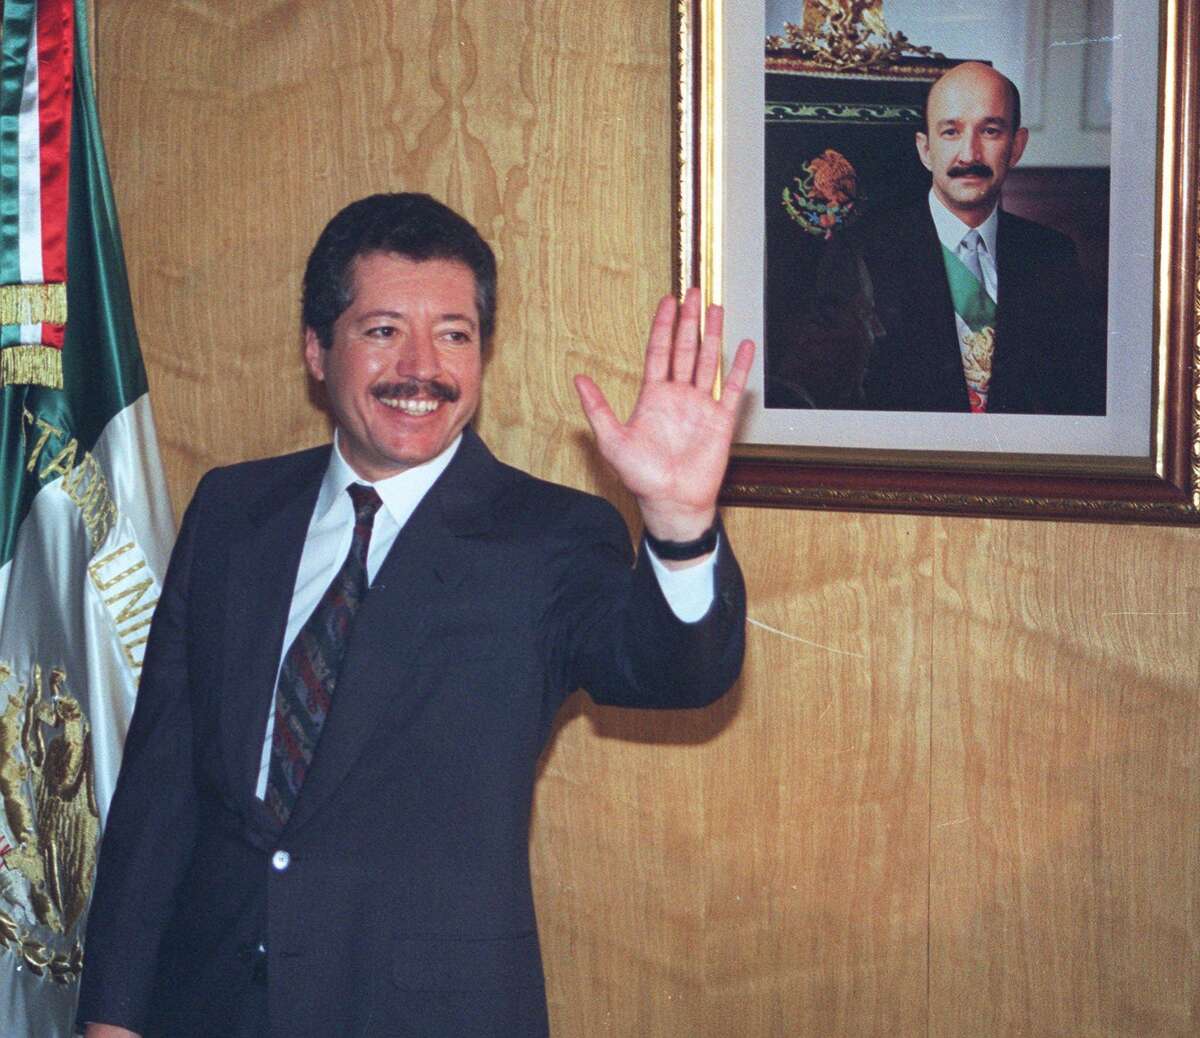 FILE--Secretary of Social Development Luis Donaldo Colosio greets reporters in his Mexico City office Nov. 28, 1993 after he was named as the ruling Institutional Revolutionary Party's presidential candidate. A Mexican flag and a portrait of Mexican President Carolos Salinas de Gortari are seen in the background. Special investigator Luis Raul Gonzalez of Mexico Attorney General's office gave his final report Friday, Oct. 20, 2000 on the March 26, 1994 assassination of then-presidential candidate Luis Colosio. The four-year investigation into the Tijuana killing of the PRI candidate concluded that he was killed by a lone gunman, Mario Aburto, now in prison. (AP Photo/Carolos Taboada)